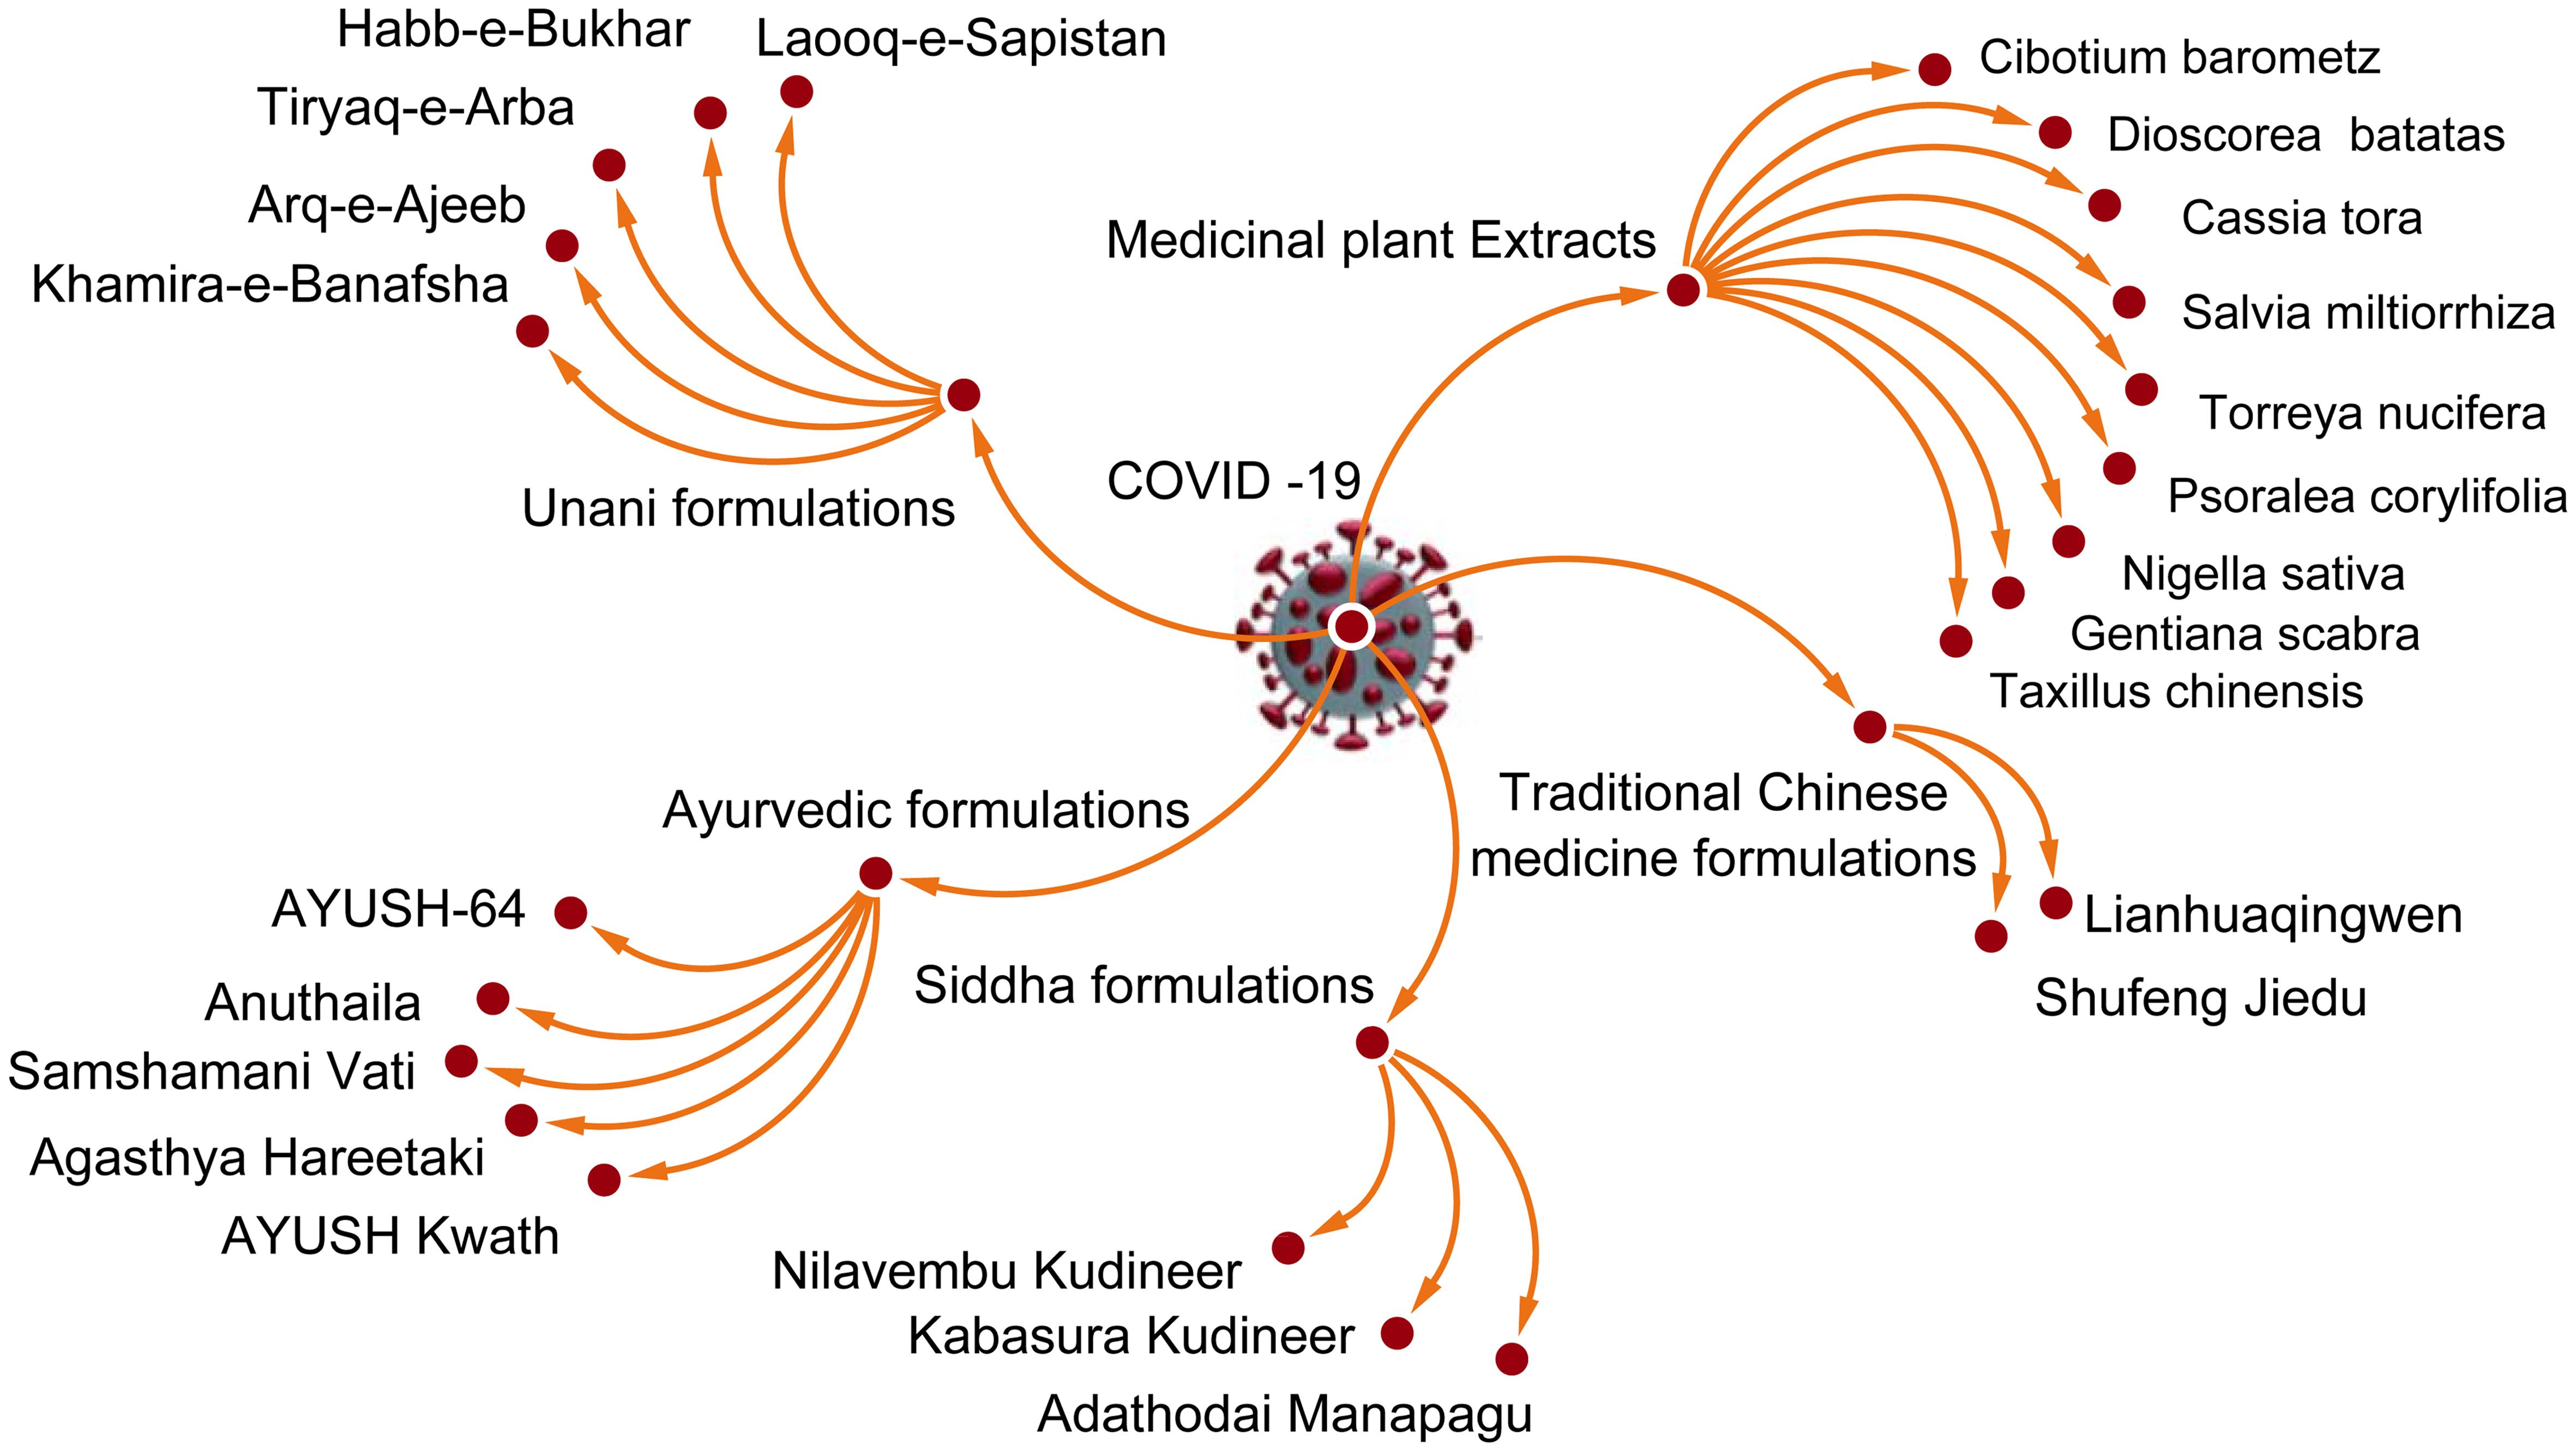 Schematic representation of medicinal plants (in terms of extracts) and their herbal formulations against COVID-19.